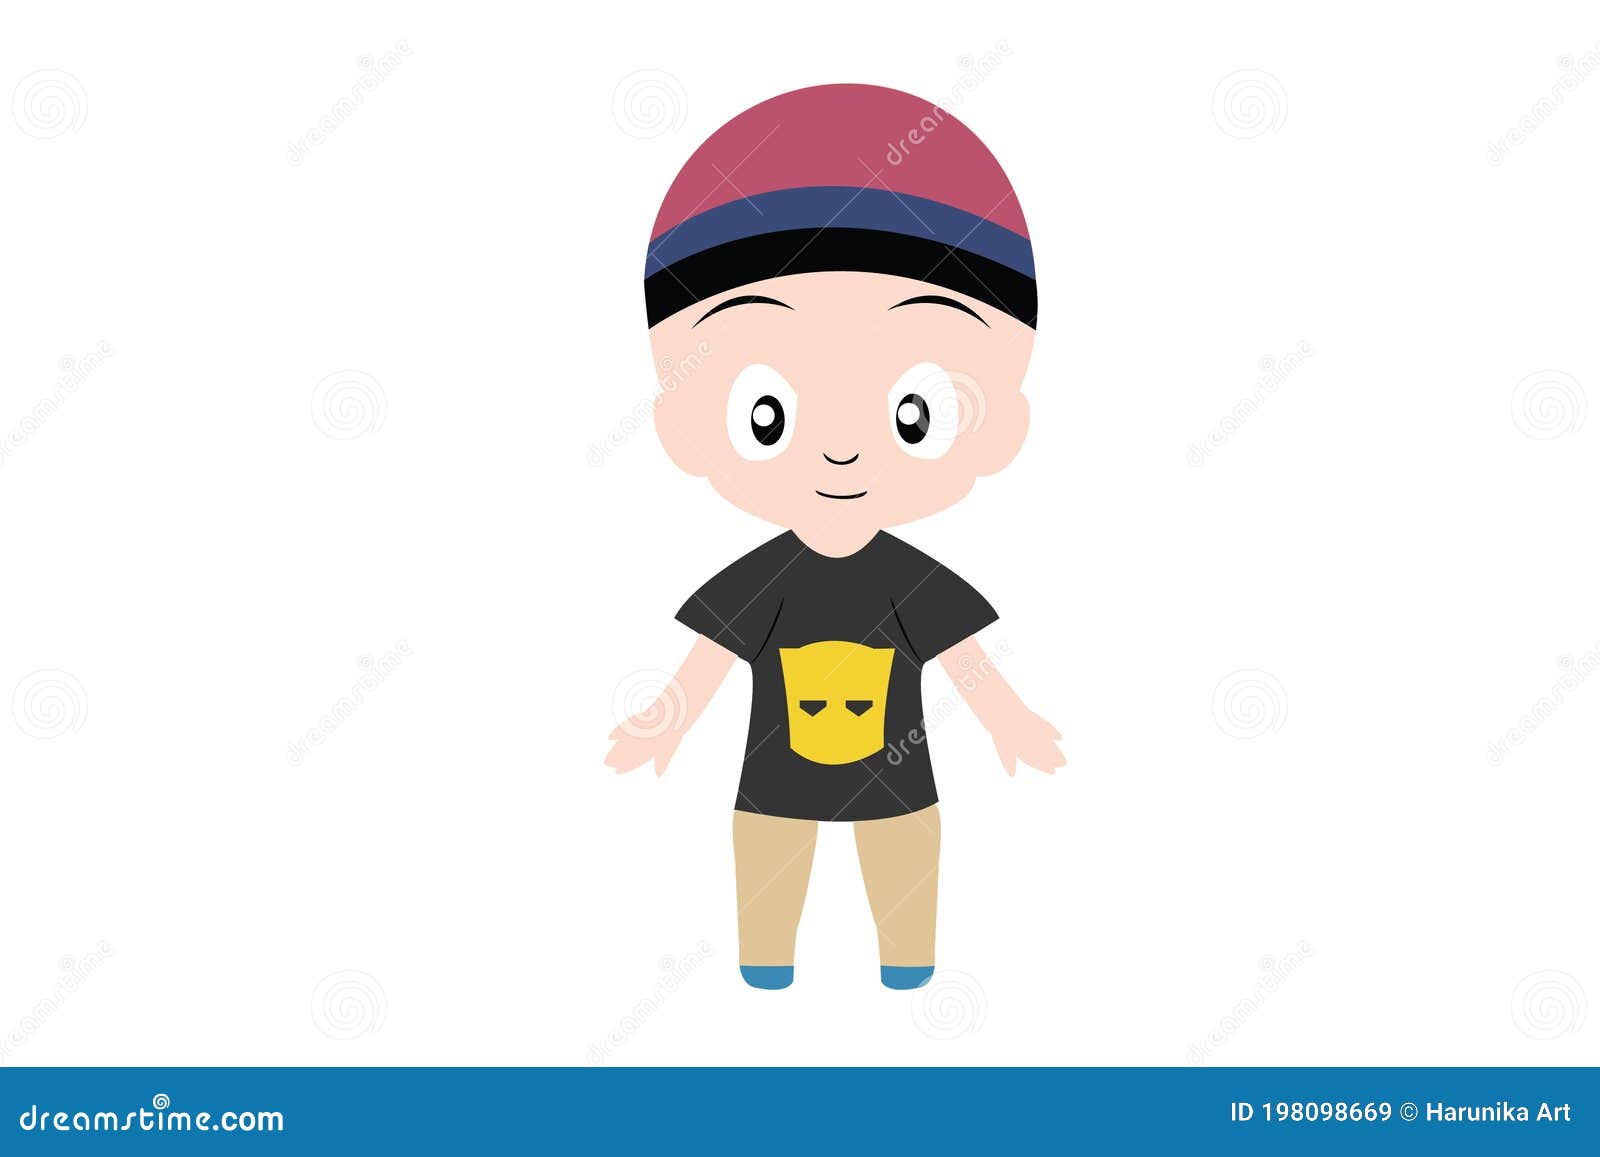 Shirt with pants Clipart and Stock Illustrations. 5,053 Shirt with pants  vector EPS illustrations and drawings available to search from thousands of  royalty free clip art graphic designers.